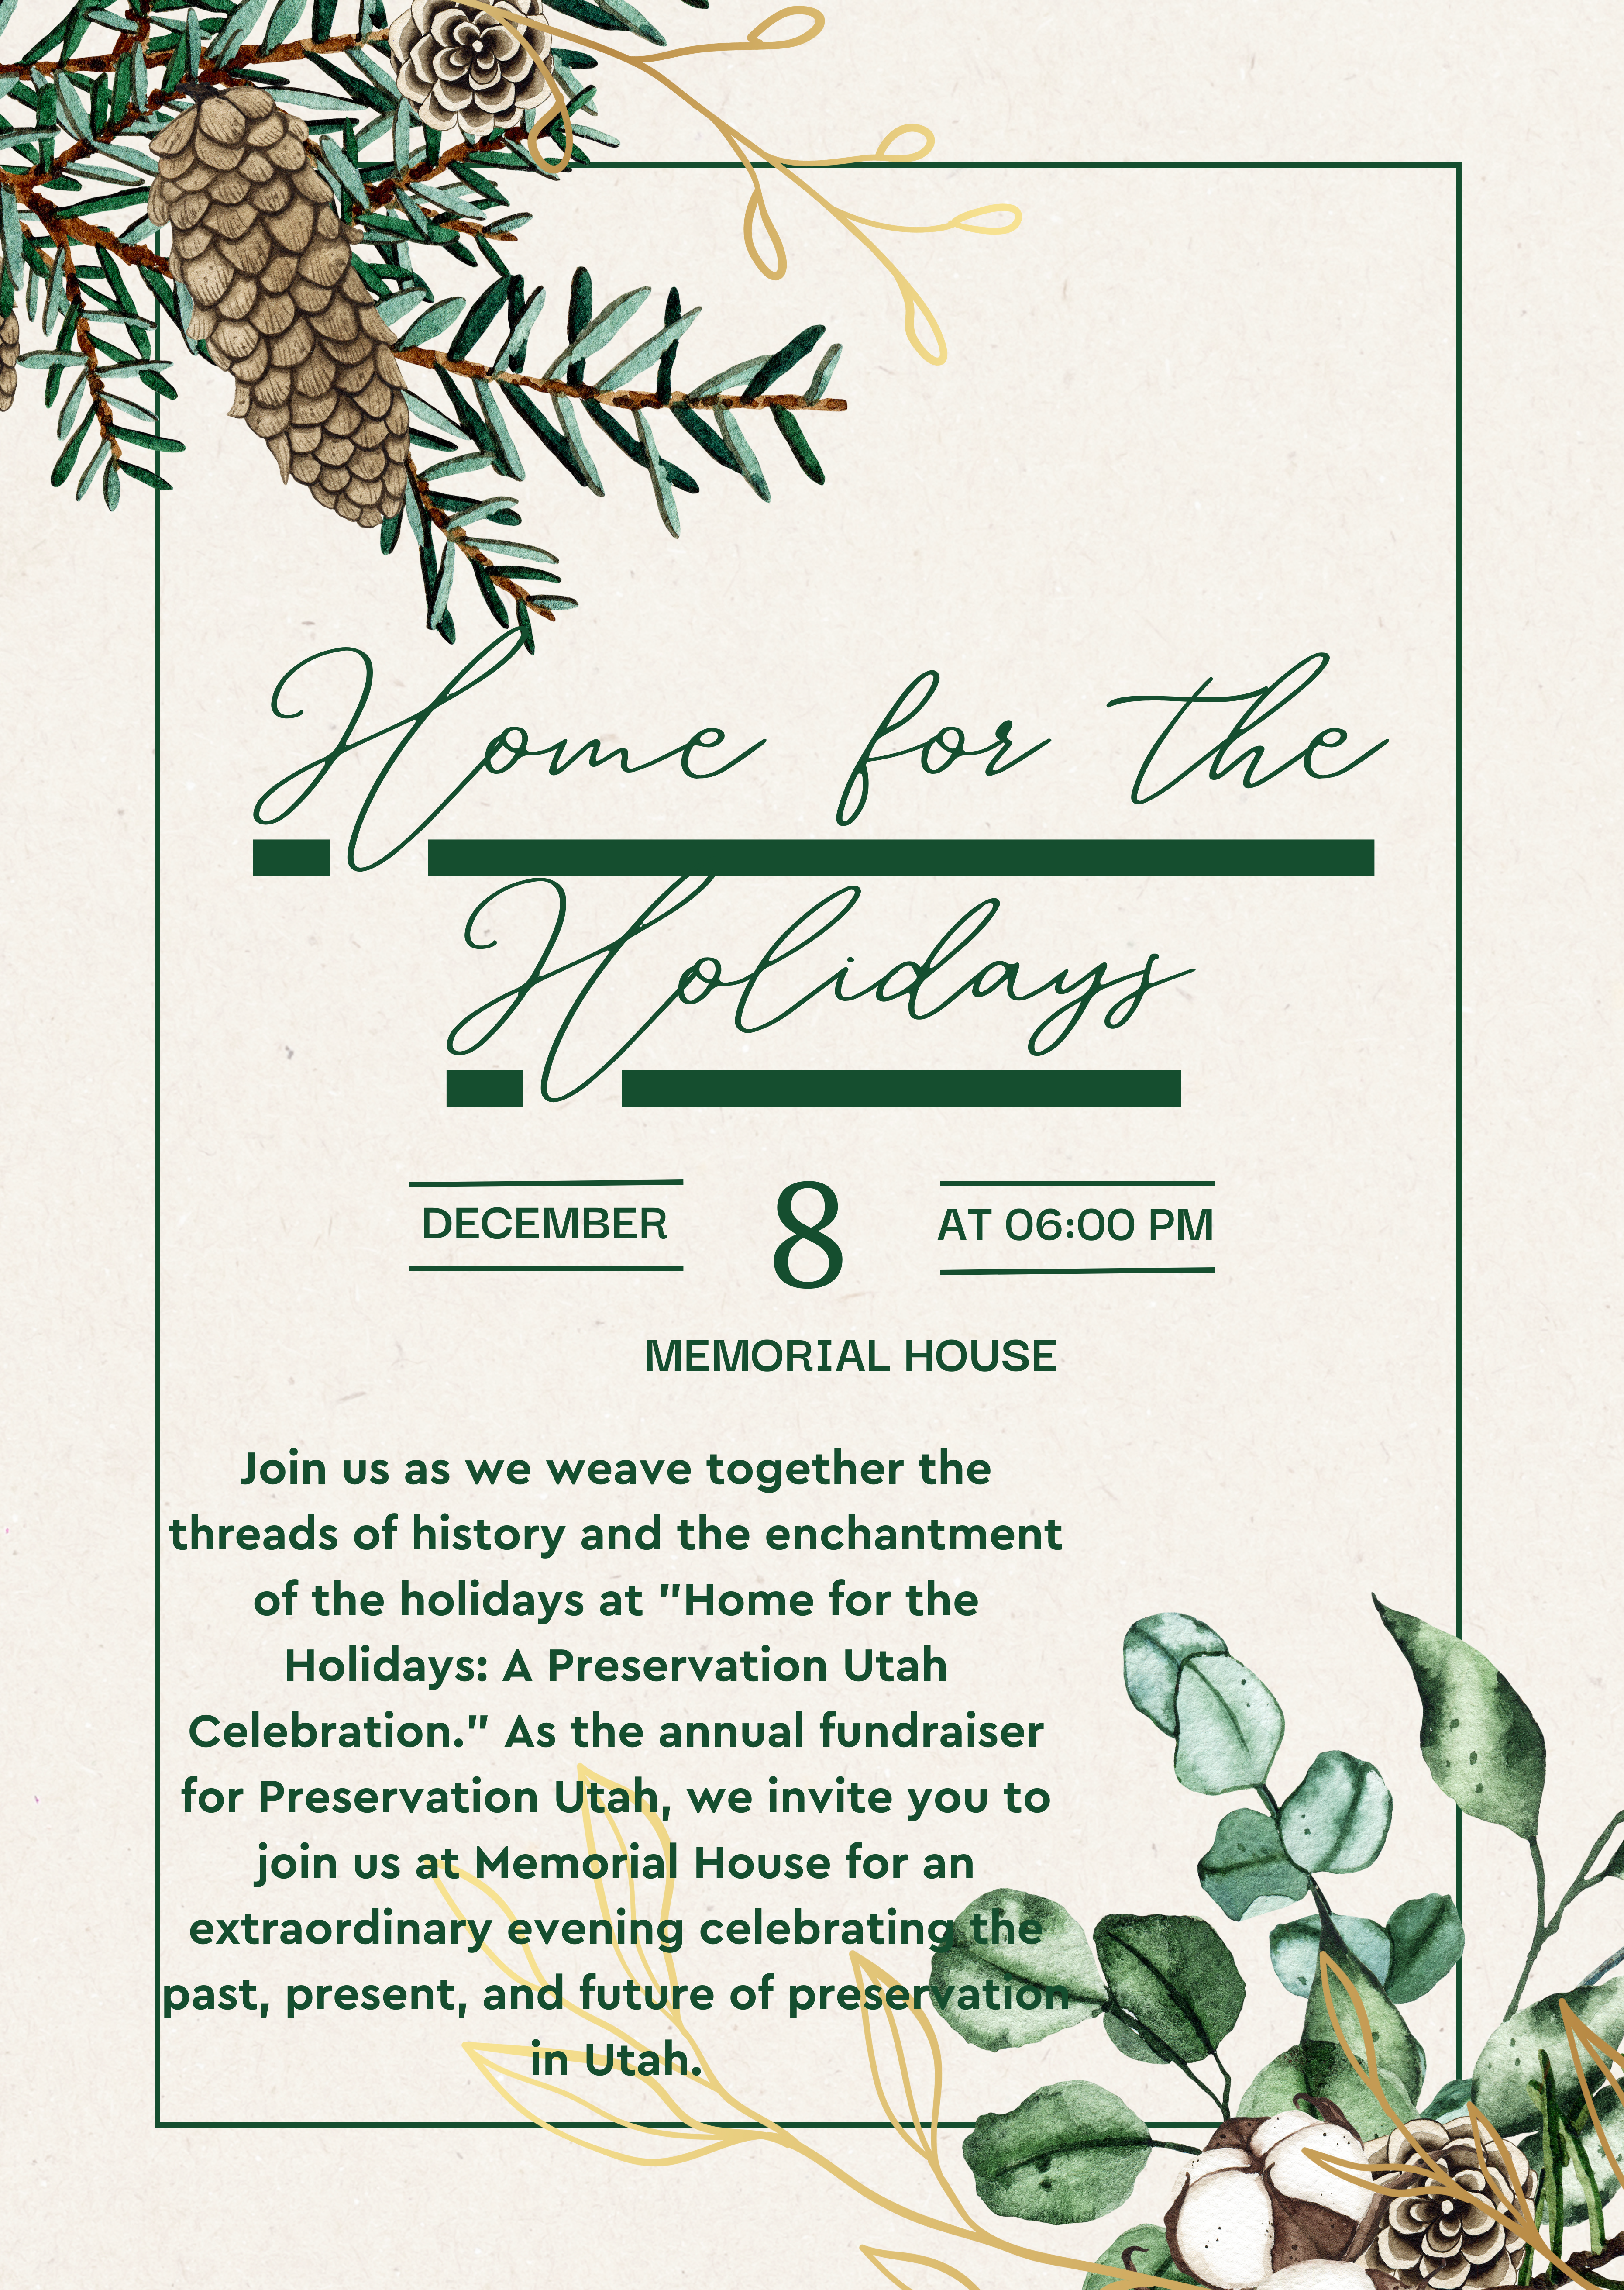 You are invited to Home for the Holidays